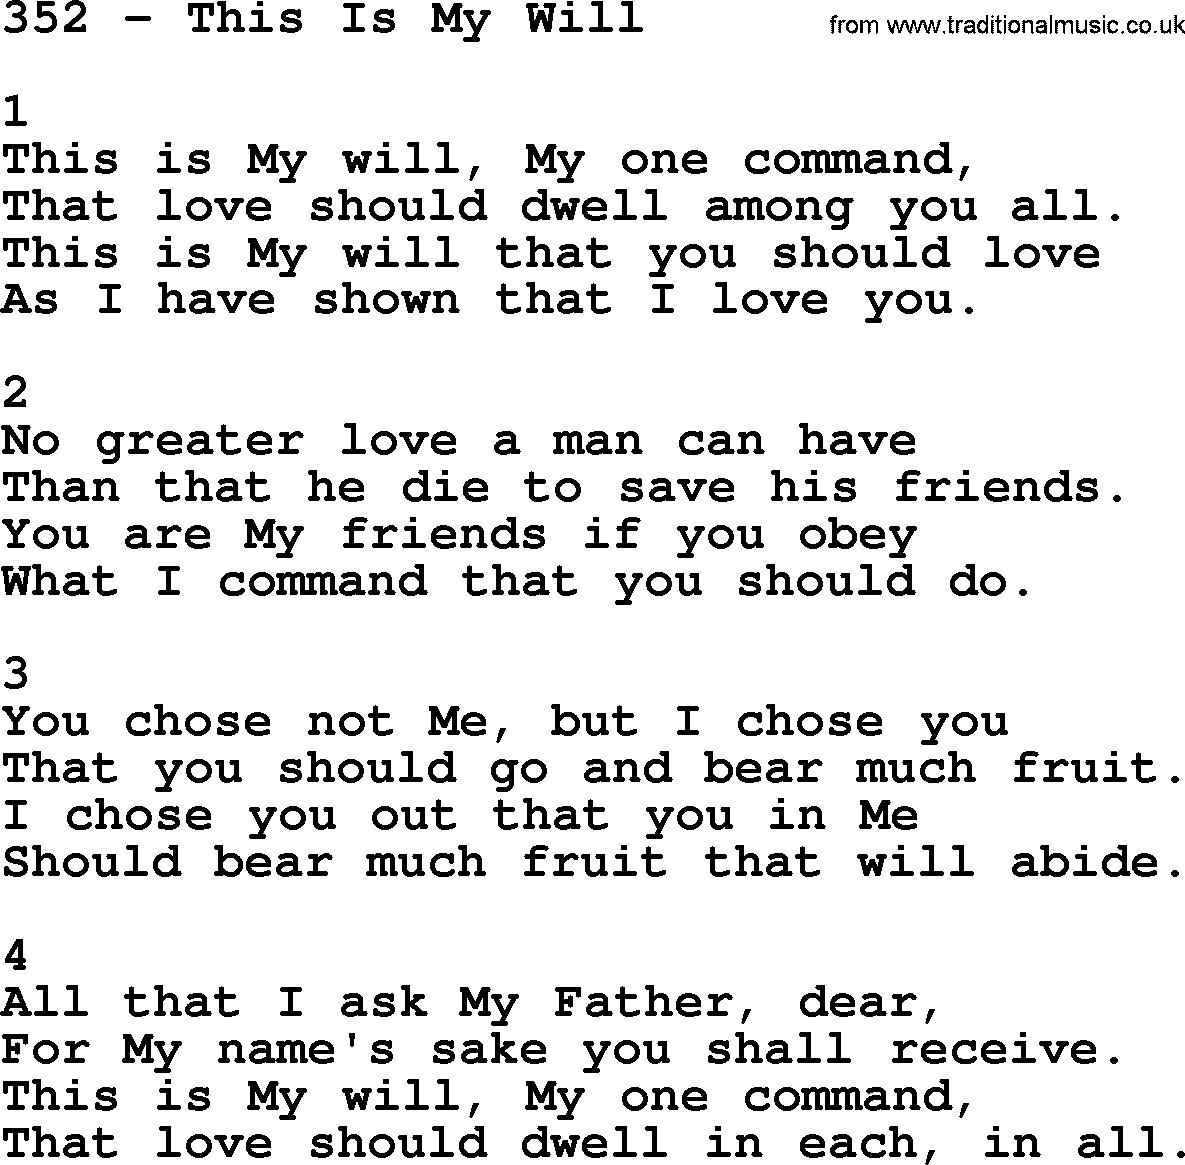 Complete Adventis Hymnal, title: 352-This Is My Will, with lyrics, midi, mp3, powerpoints(PPT) and PDF,